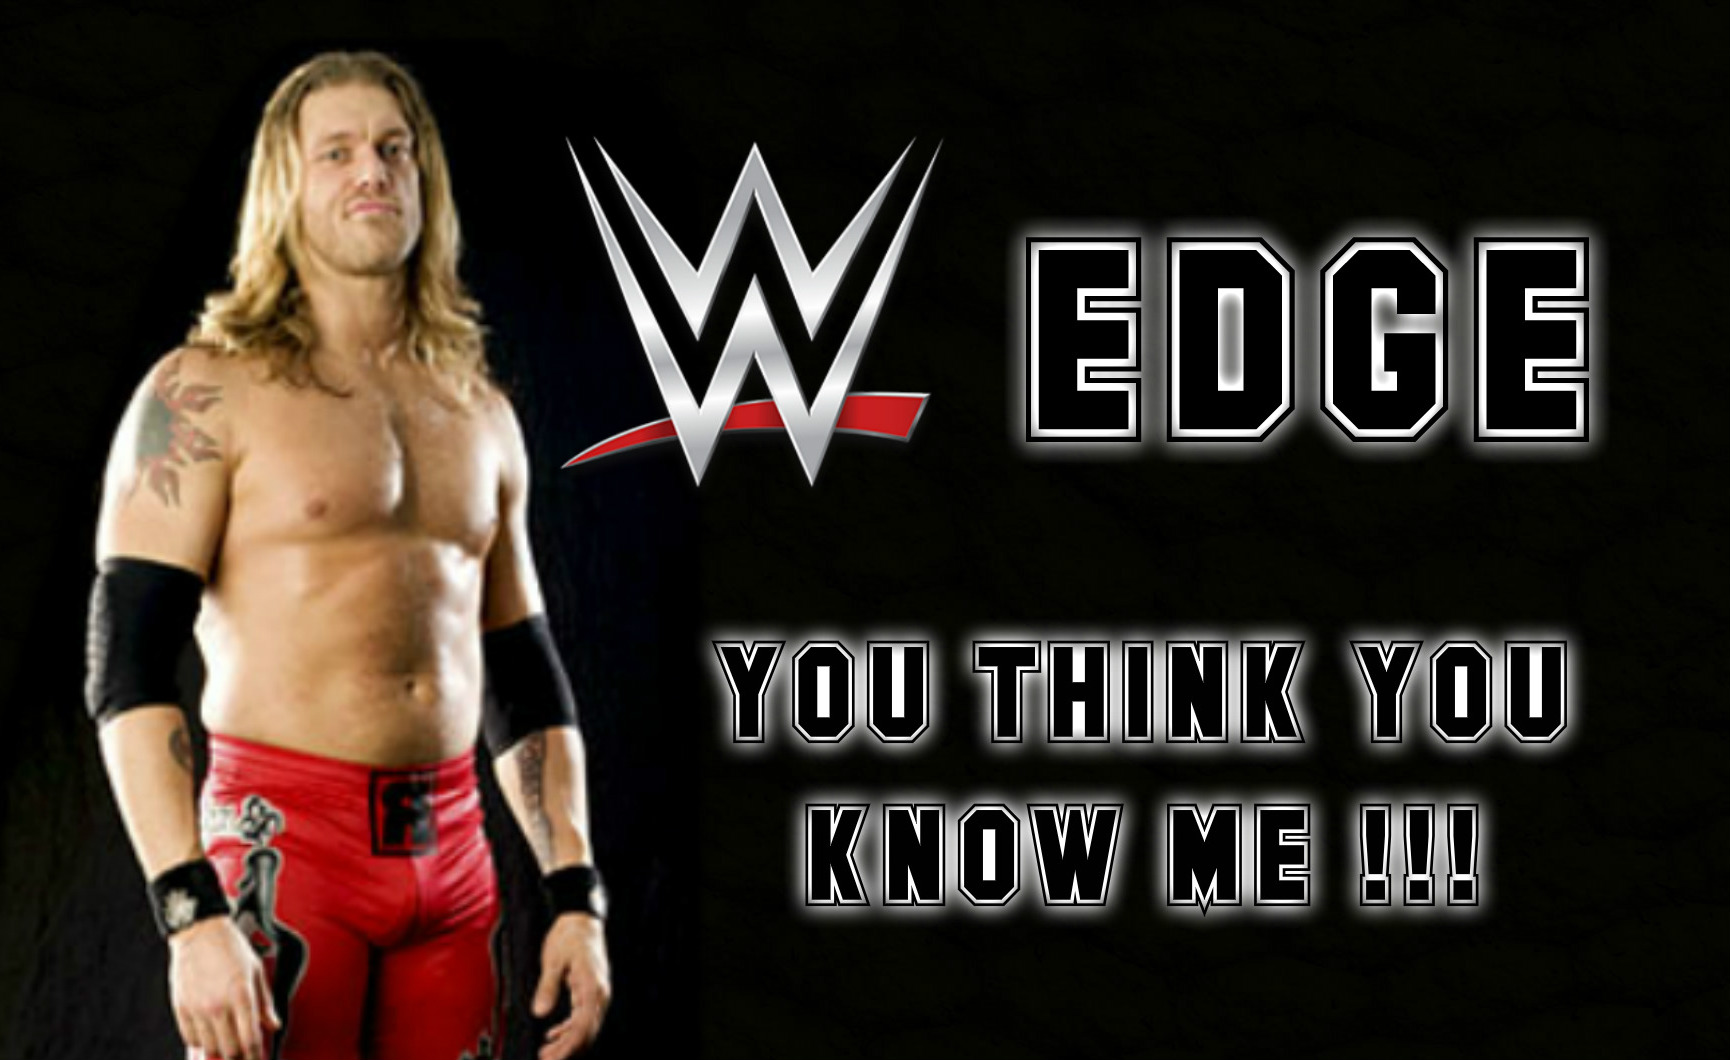 WWE Edge You Think You Know Me WD20 3rd April (2017)